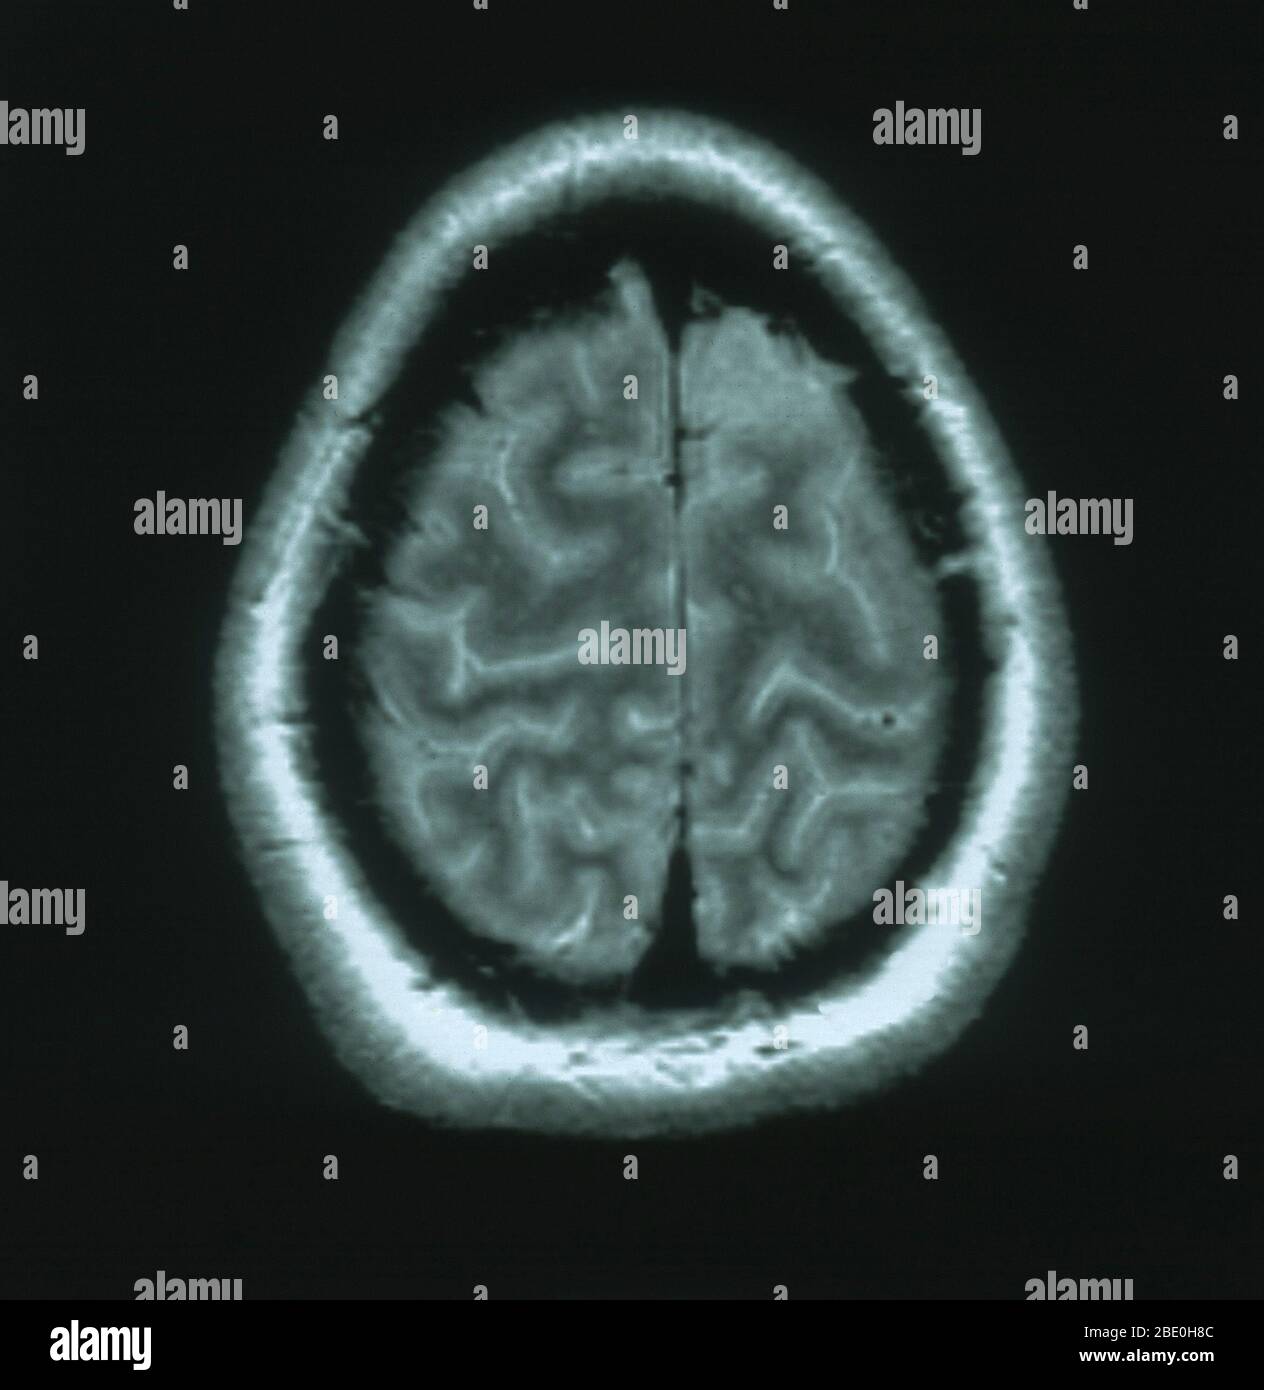 MRI scan, T2 weighted, axial view through the brain of a 54 year old female. The MRI is normal. Stock Photo